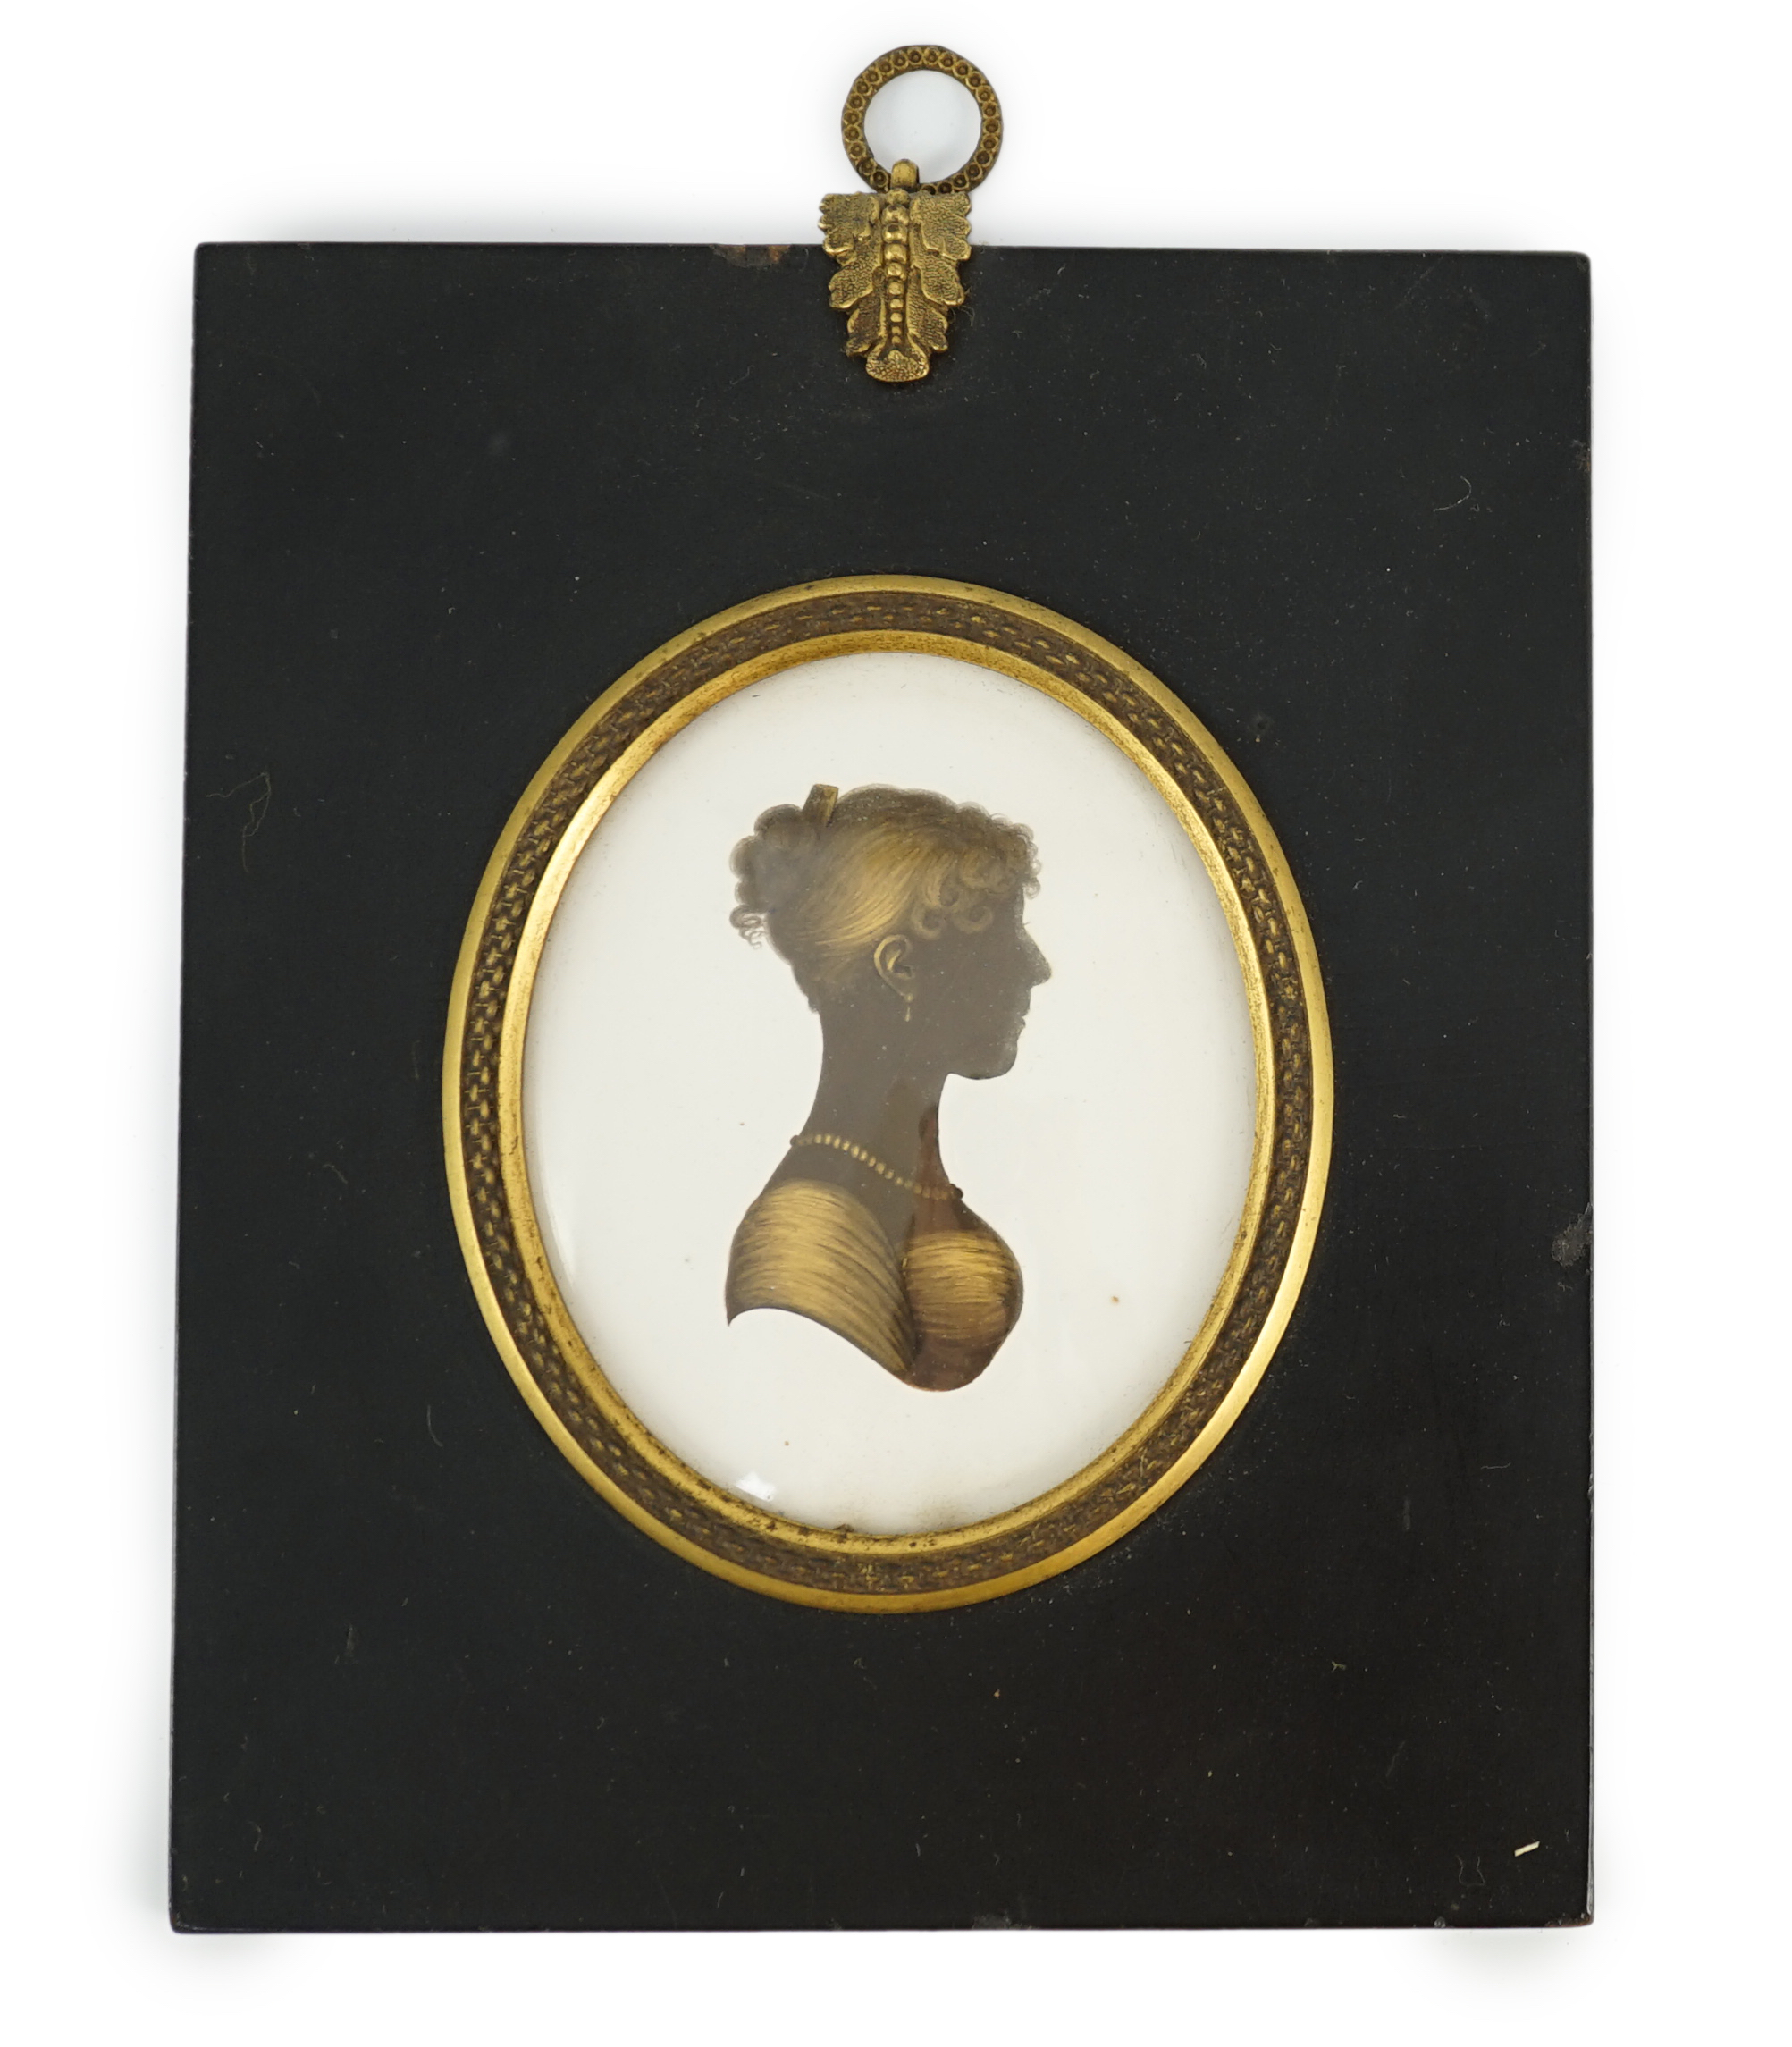 John Miers (1756-1821), Silhouette of a young lady, painted and bronzed plaster, 8 x 6.8cm.